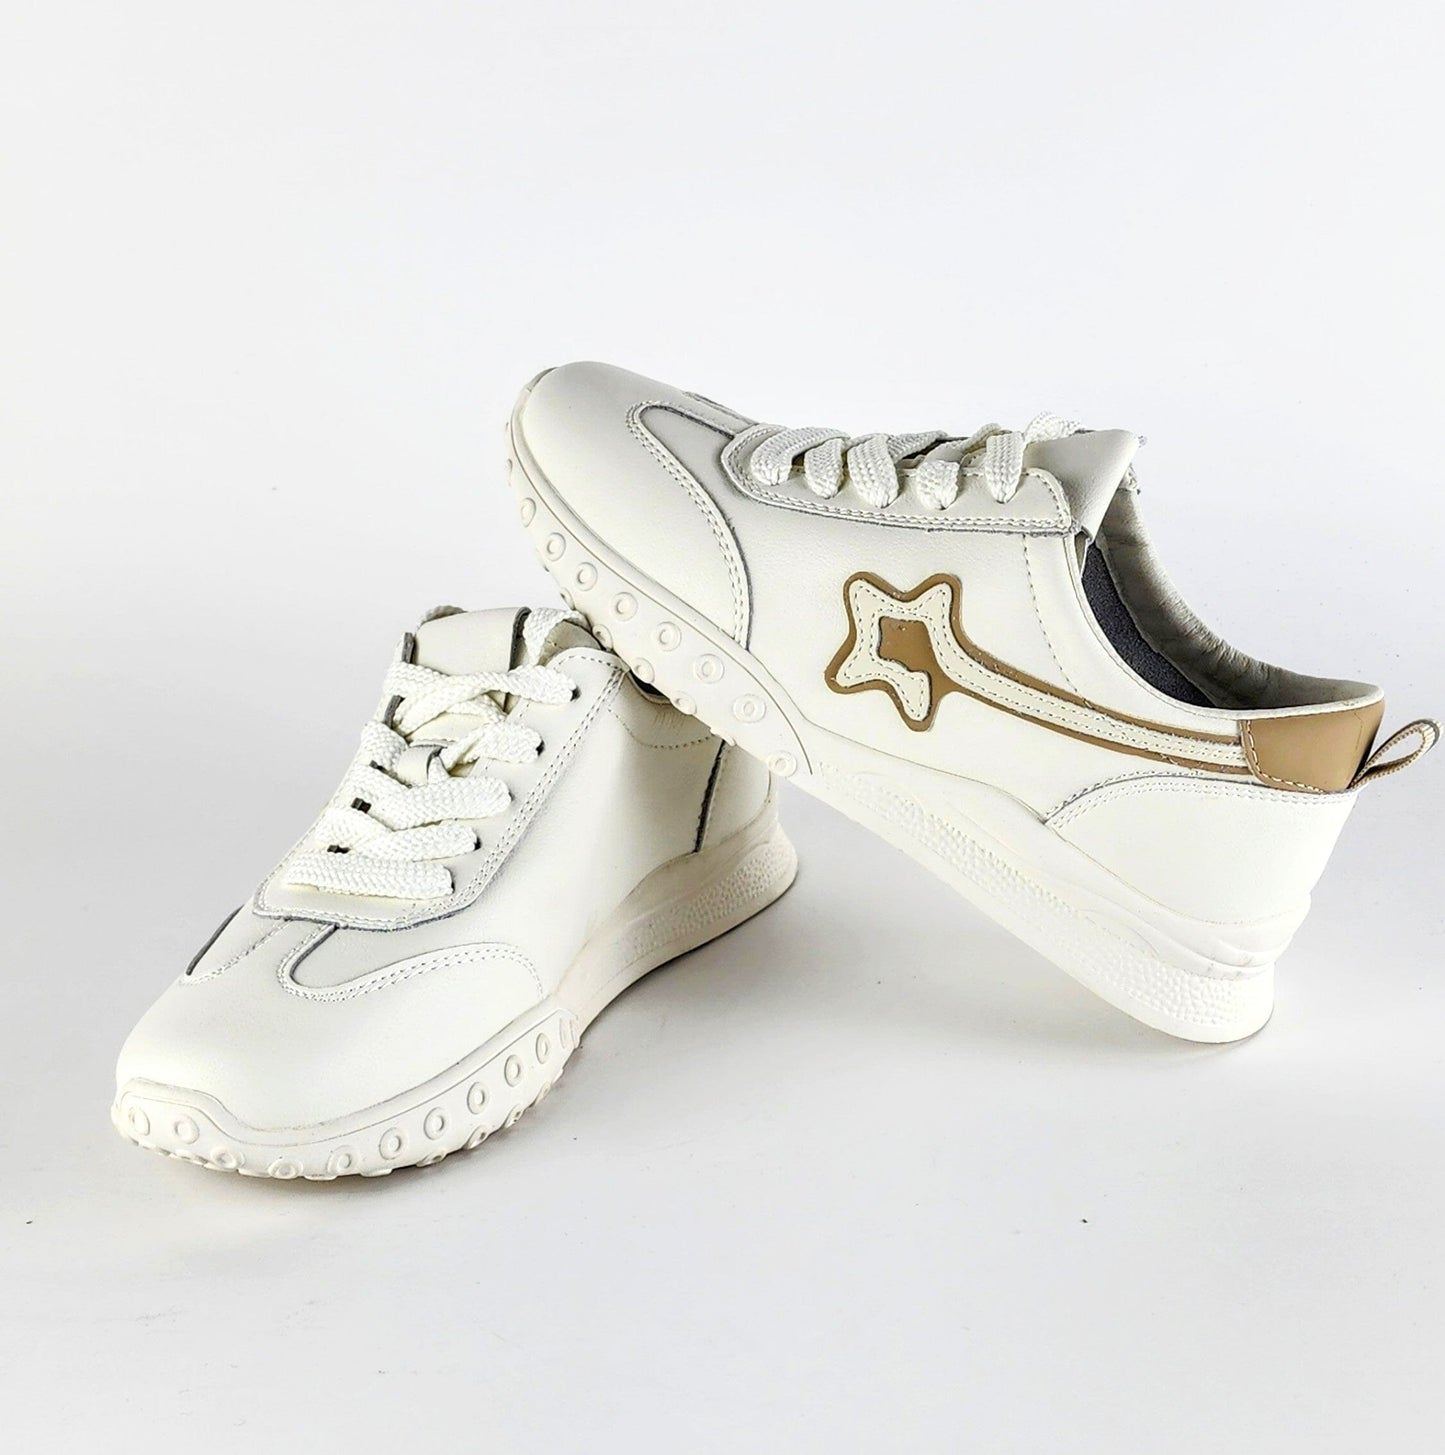 SS23009 White leather sneakers with star and flexible sole sneakers Sam Star Shoes Tan 36 